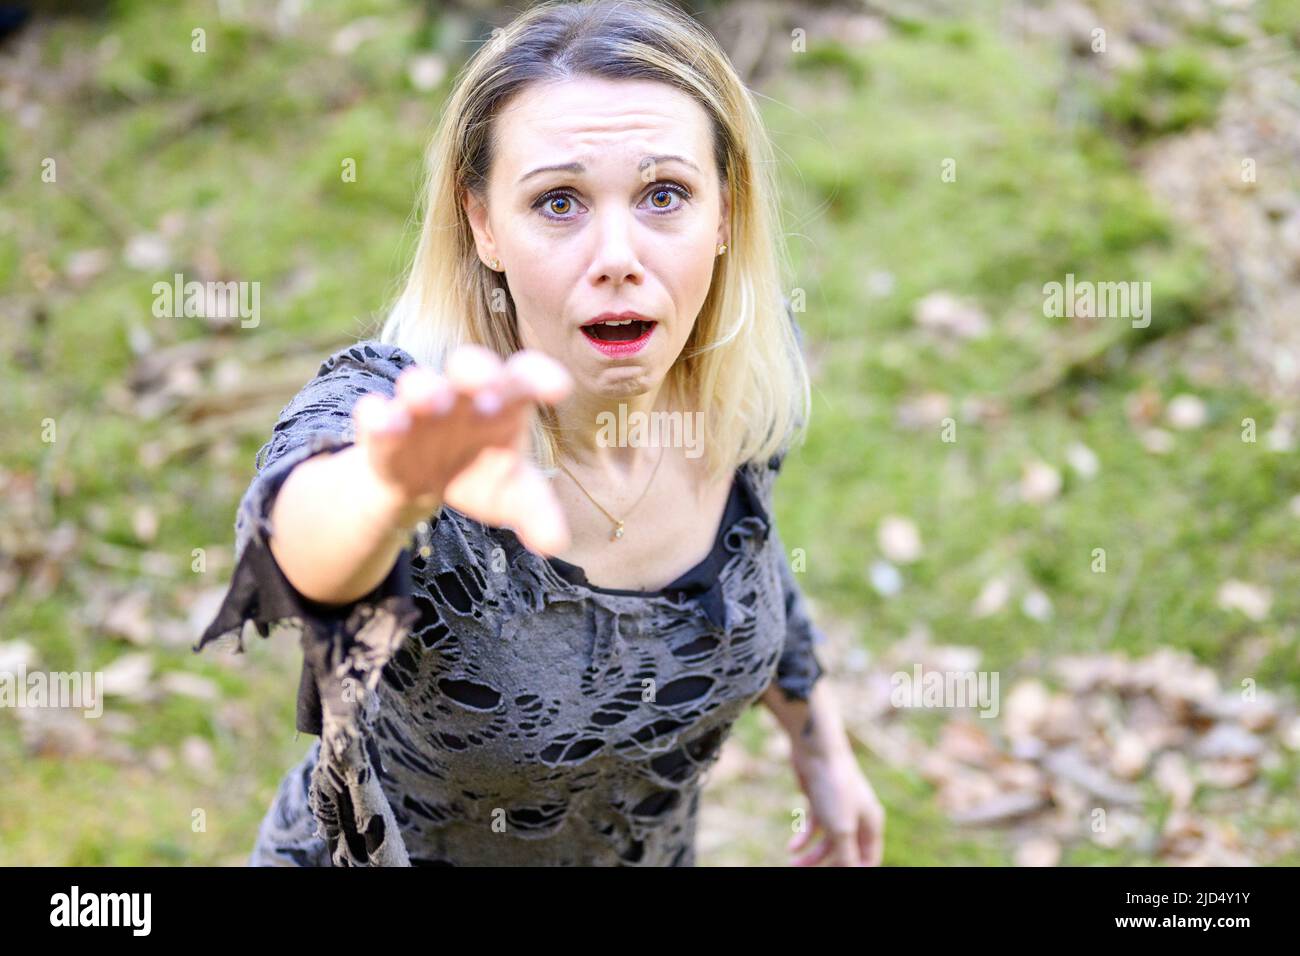 Wild angry blond woman reaching up to claw at the camera with a snarl as she crouches beside a forest tree Stock Photo